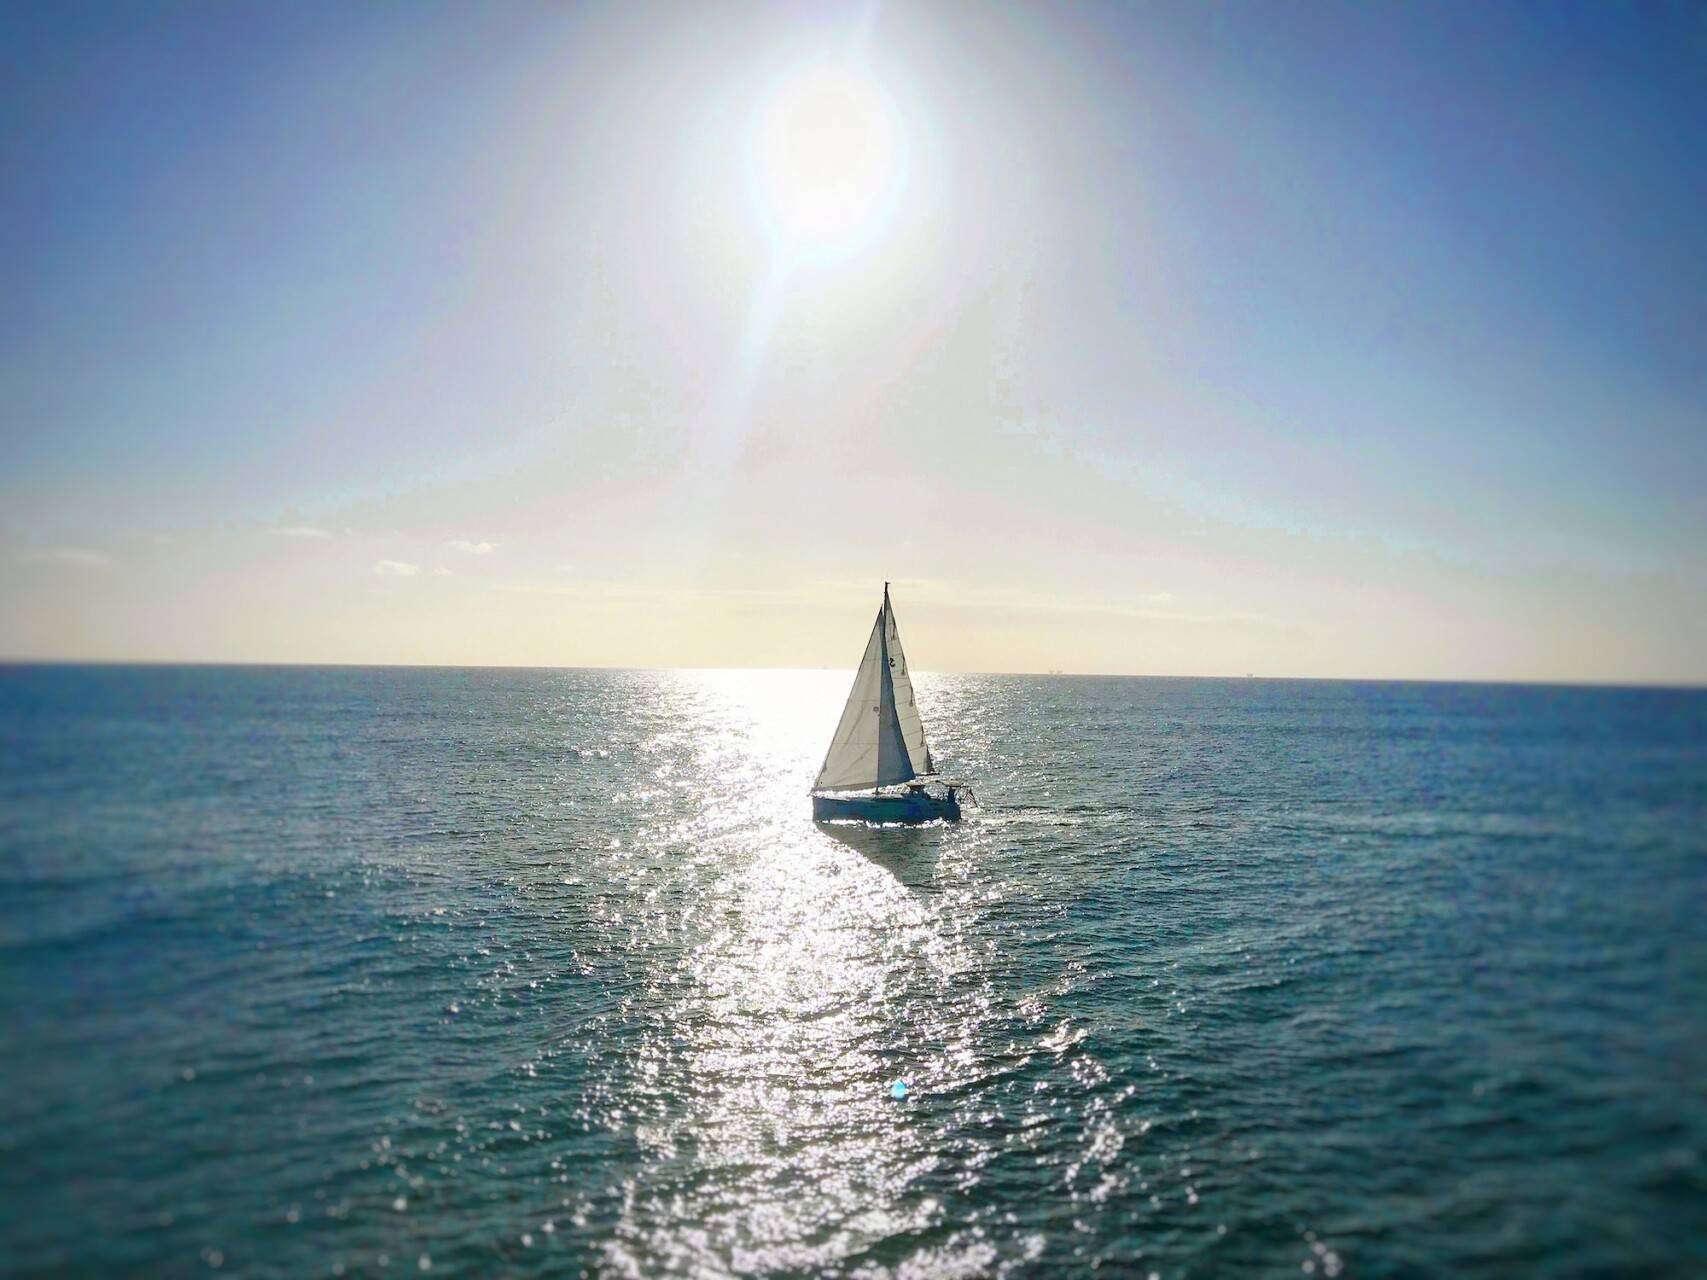 Sailing on the ocean